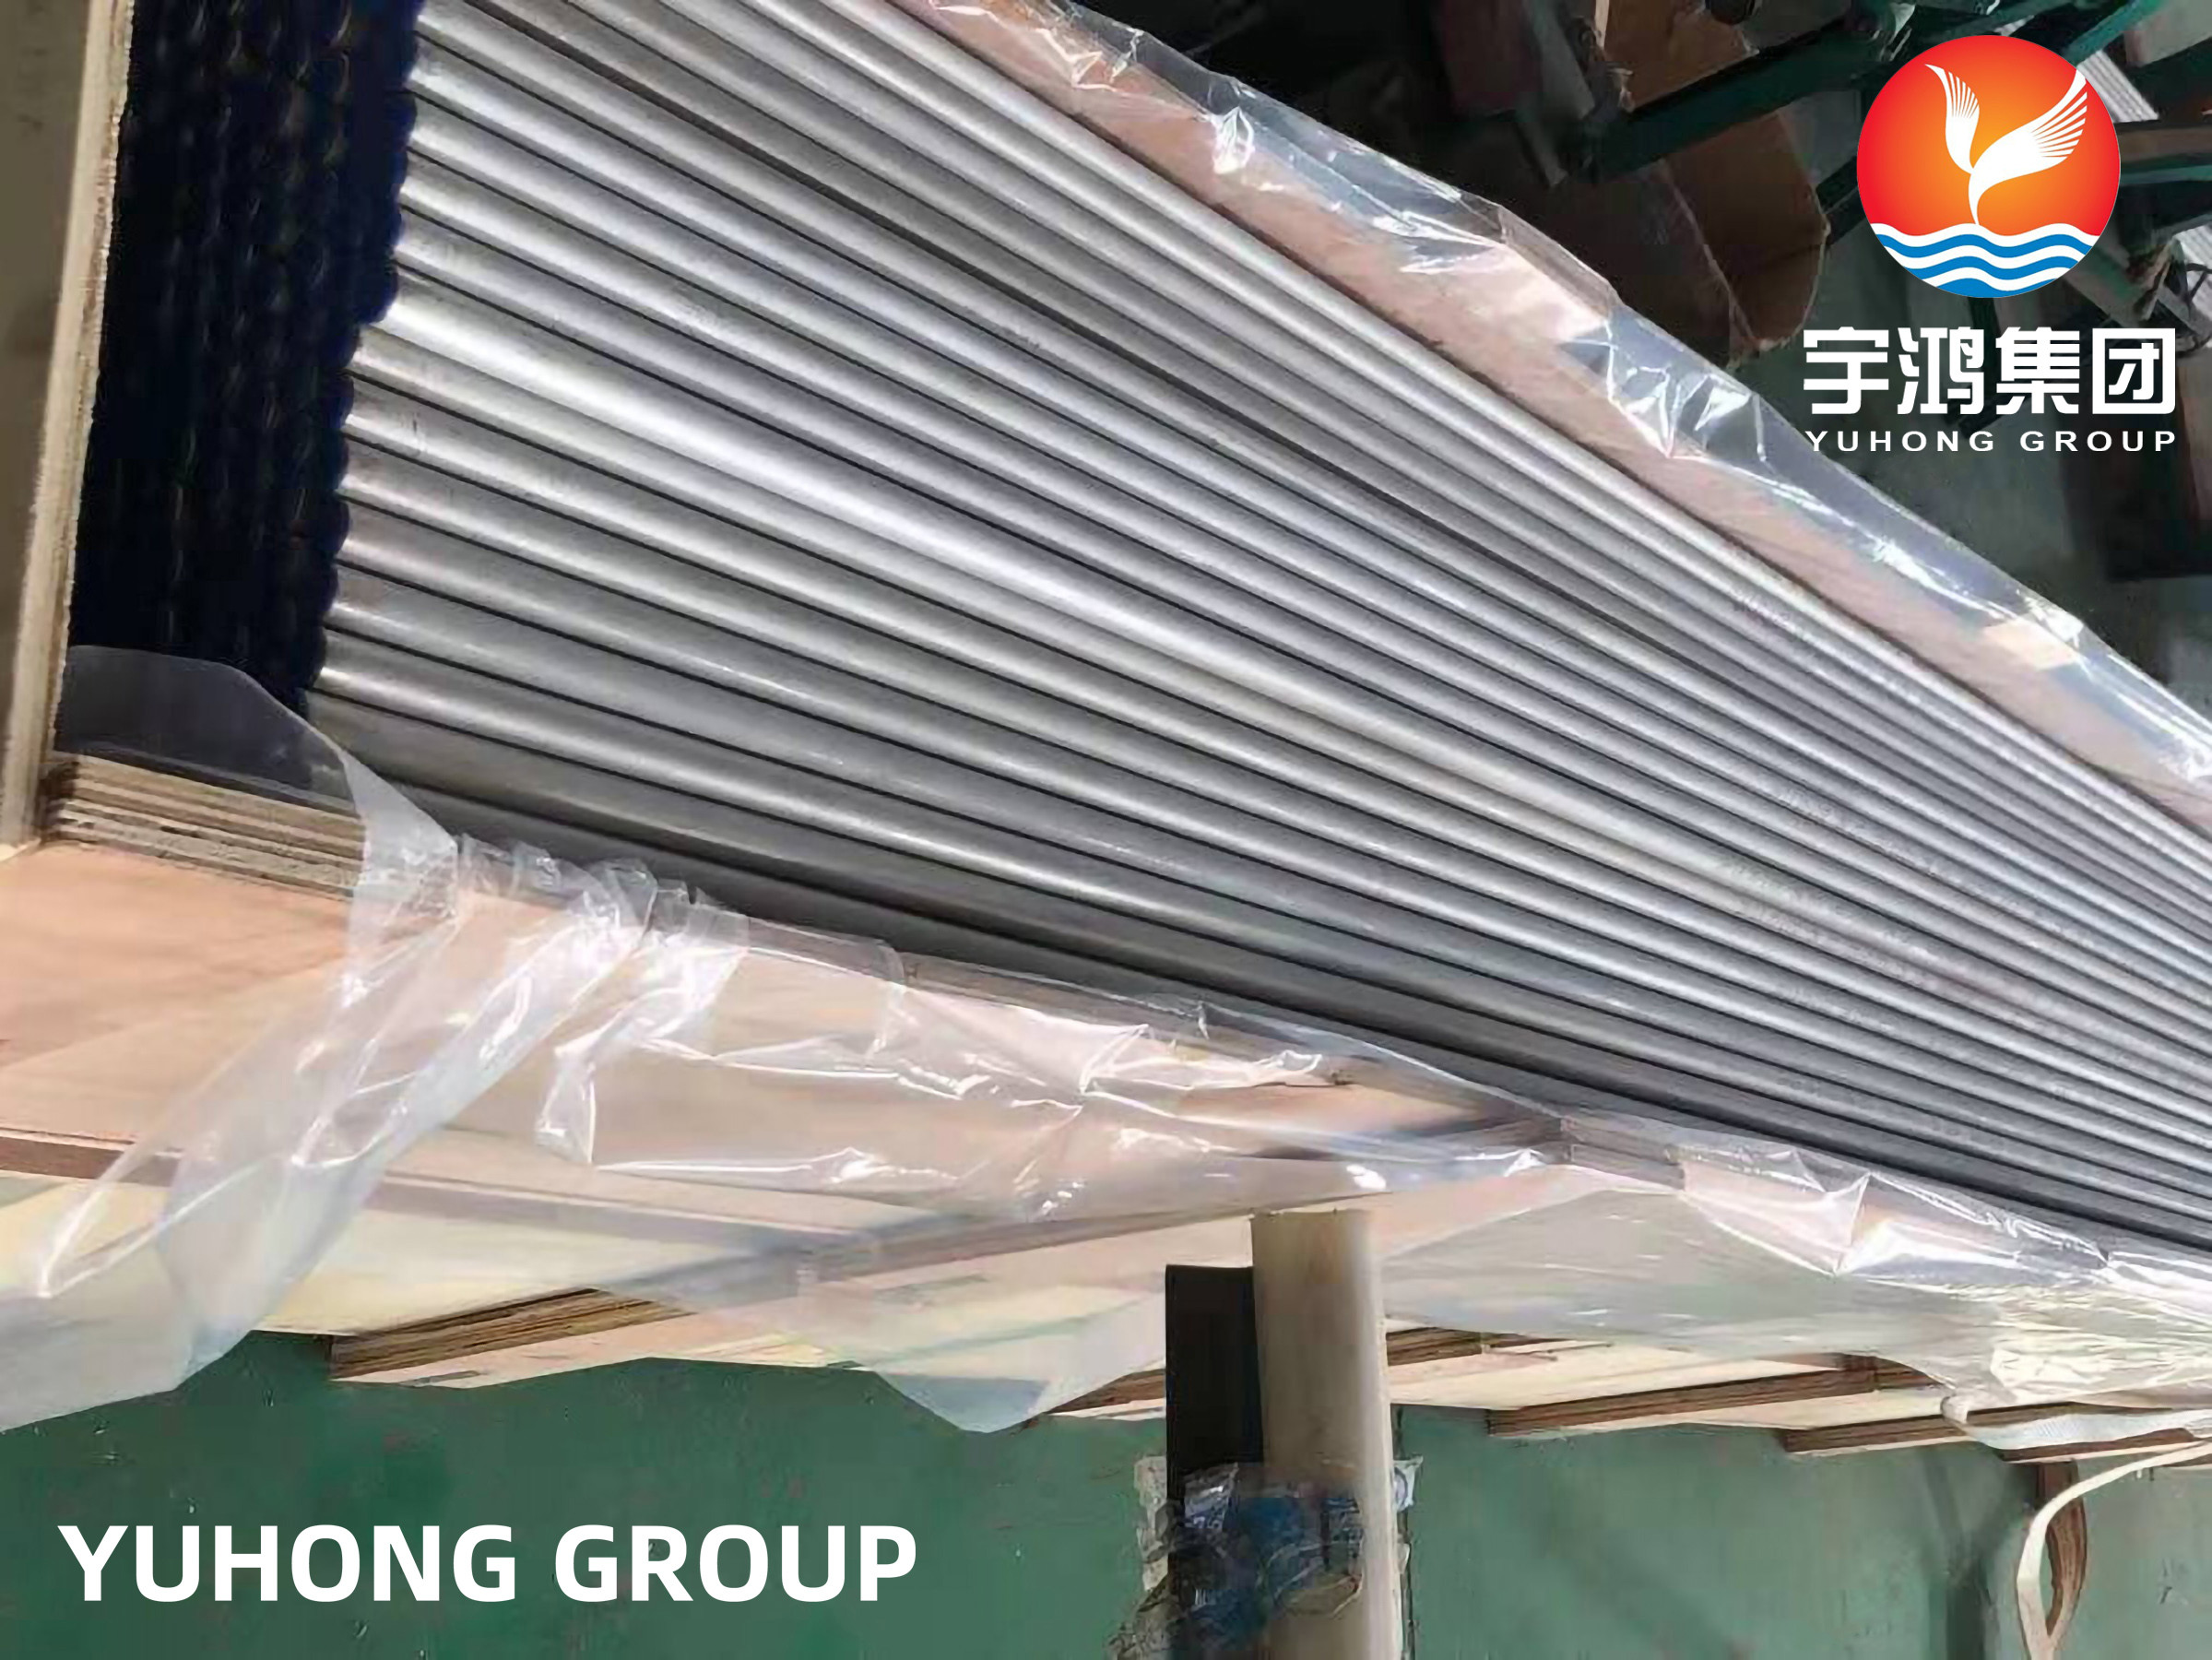 Quality Stainless Steel Seamless Tube for sale